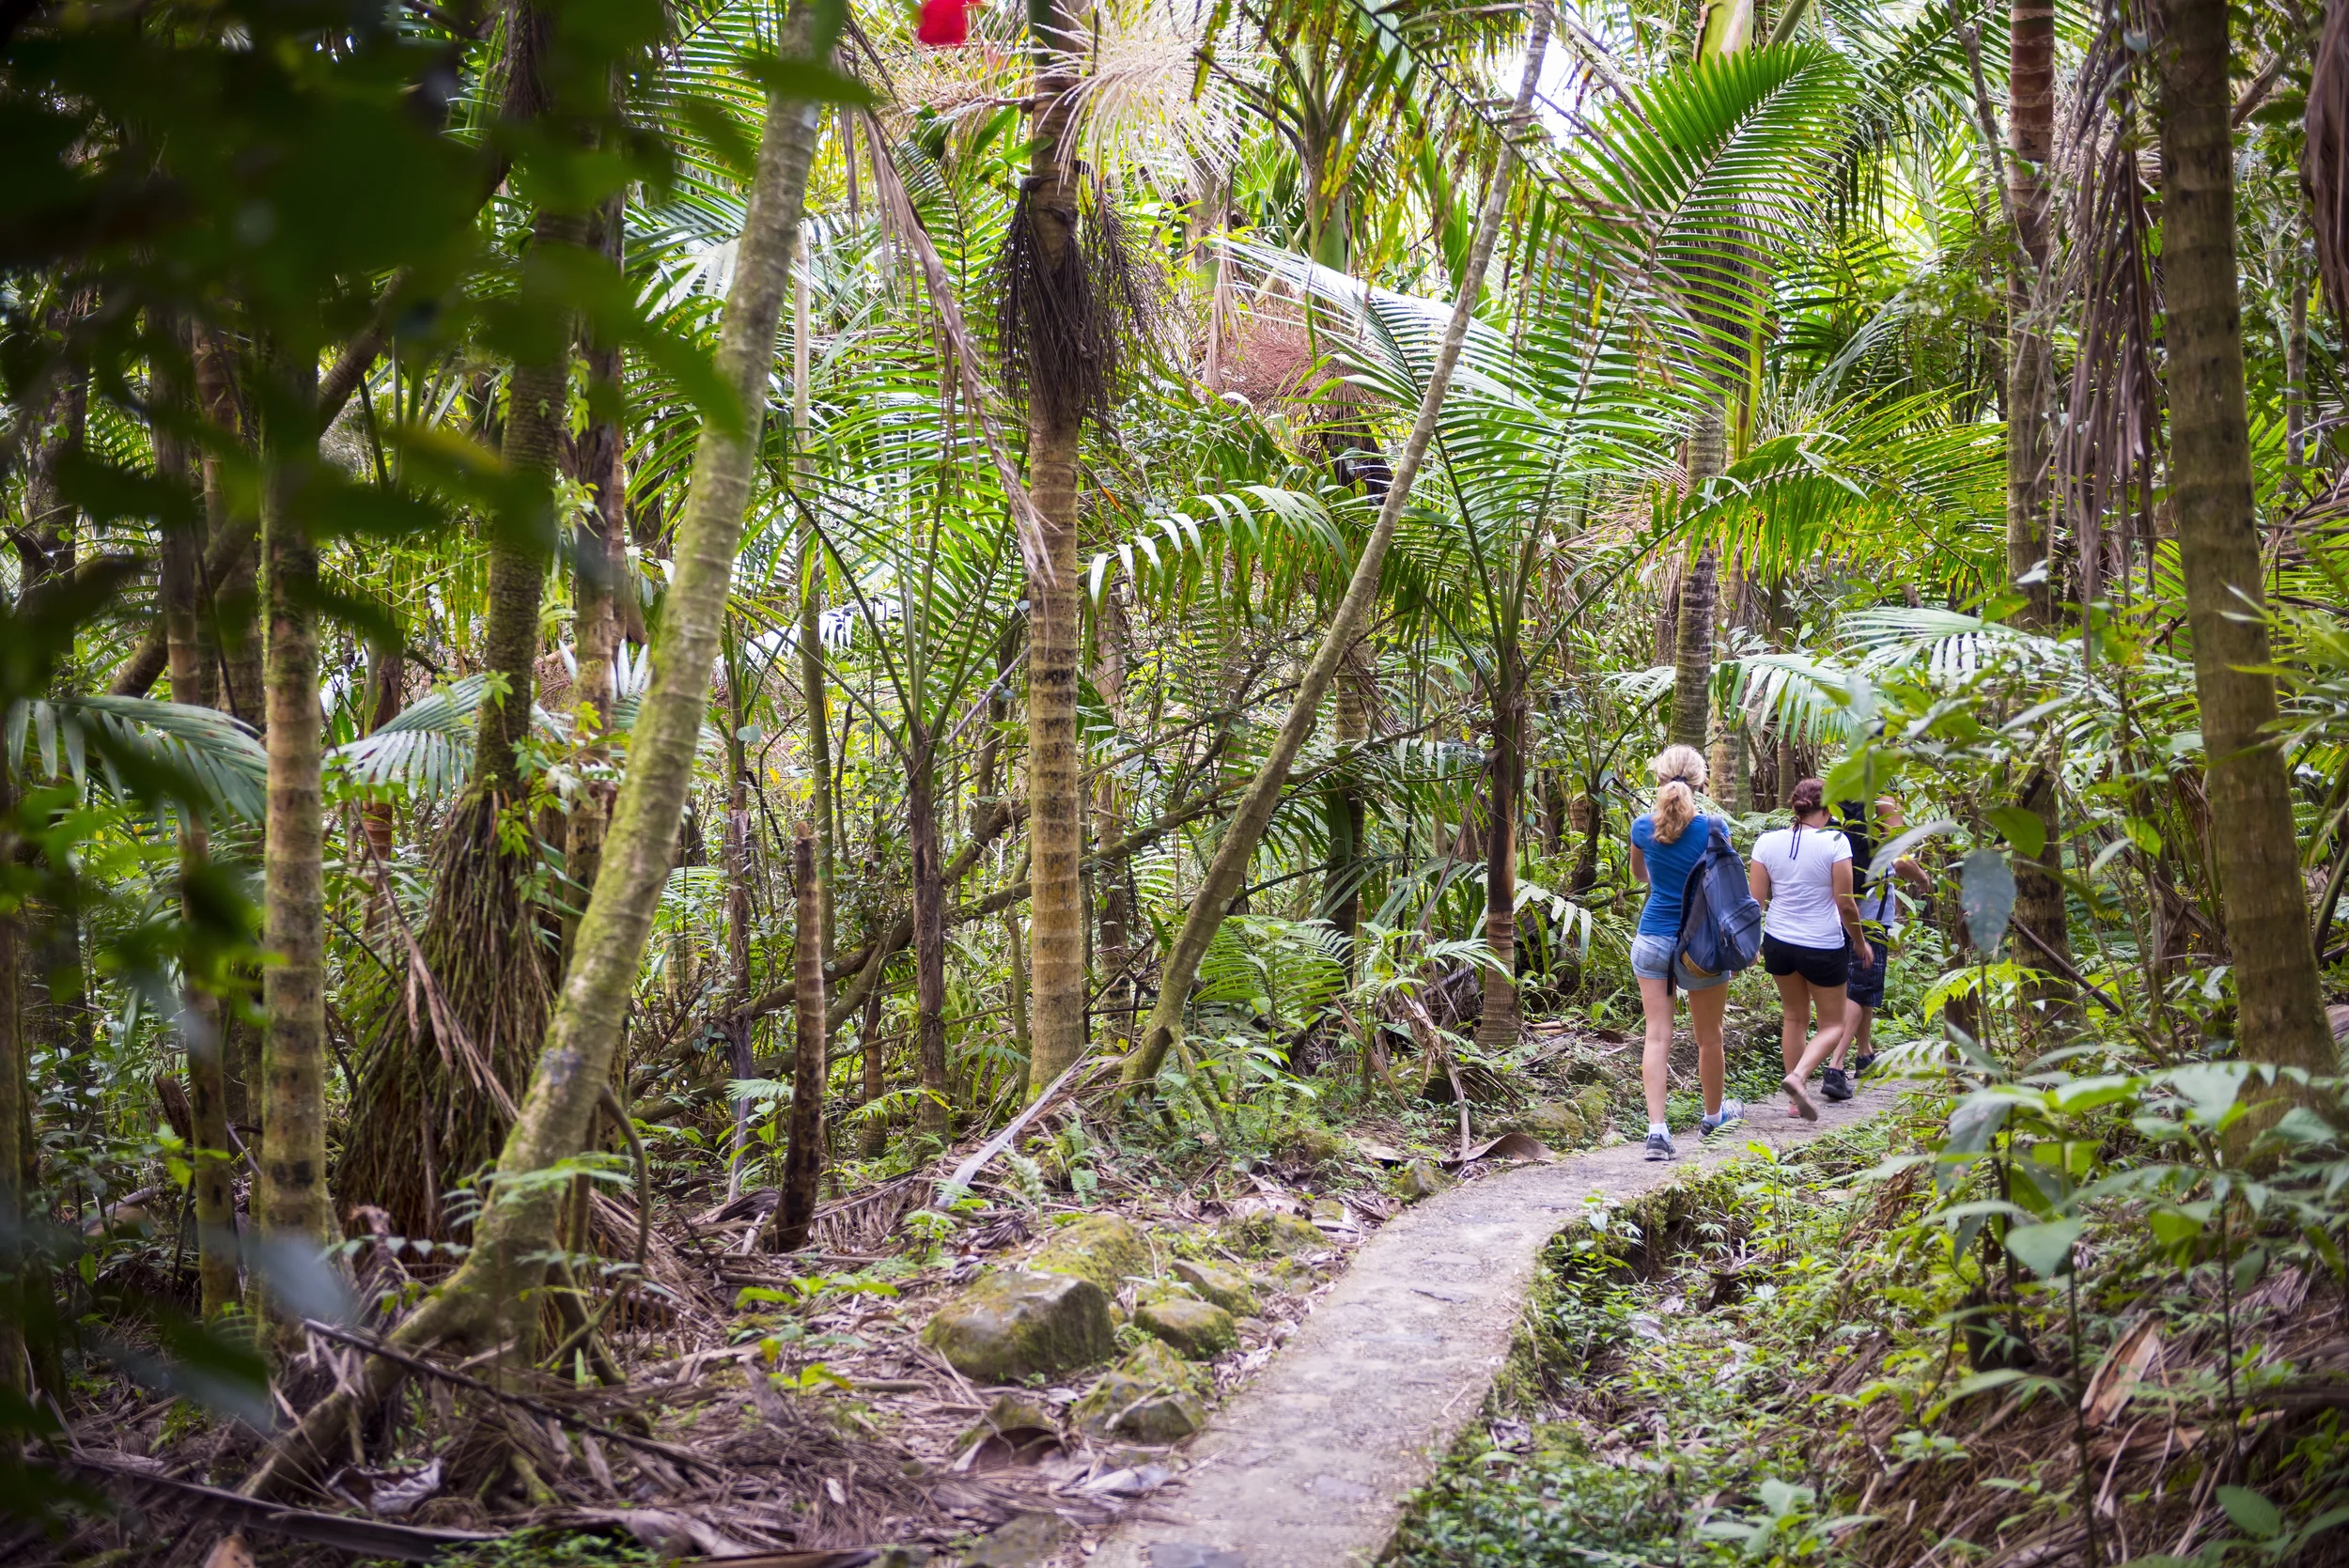 Some of the Best Hikes in Puerto Rico